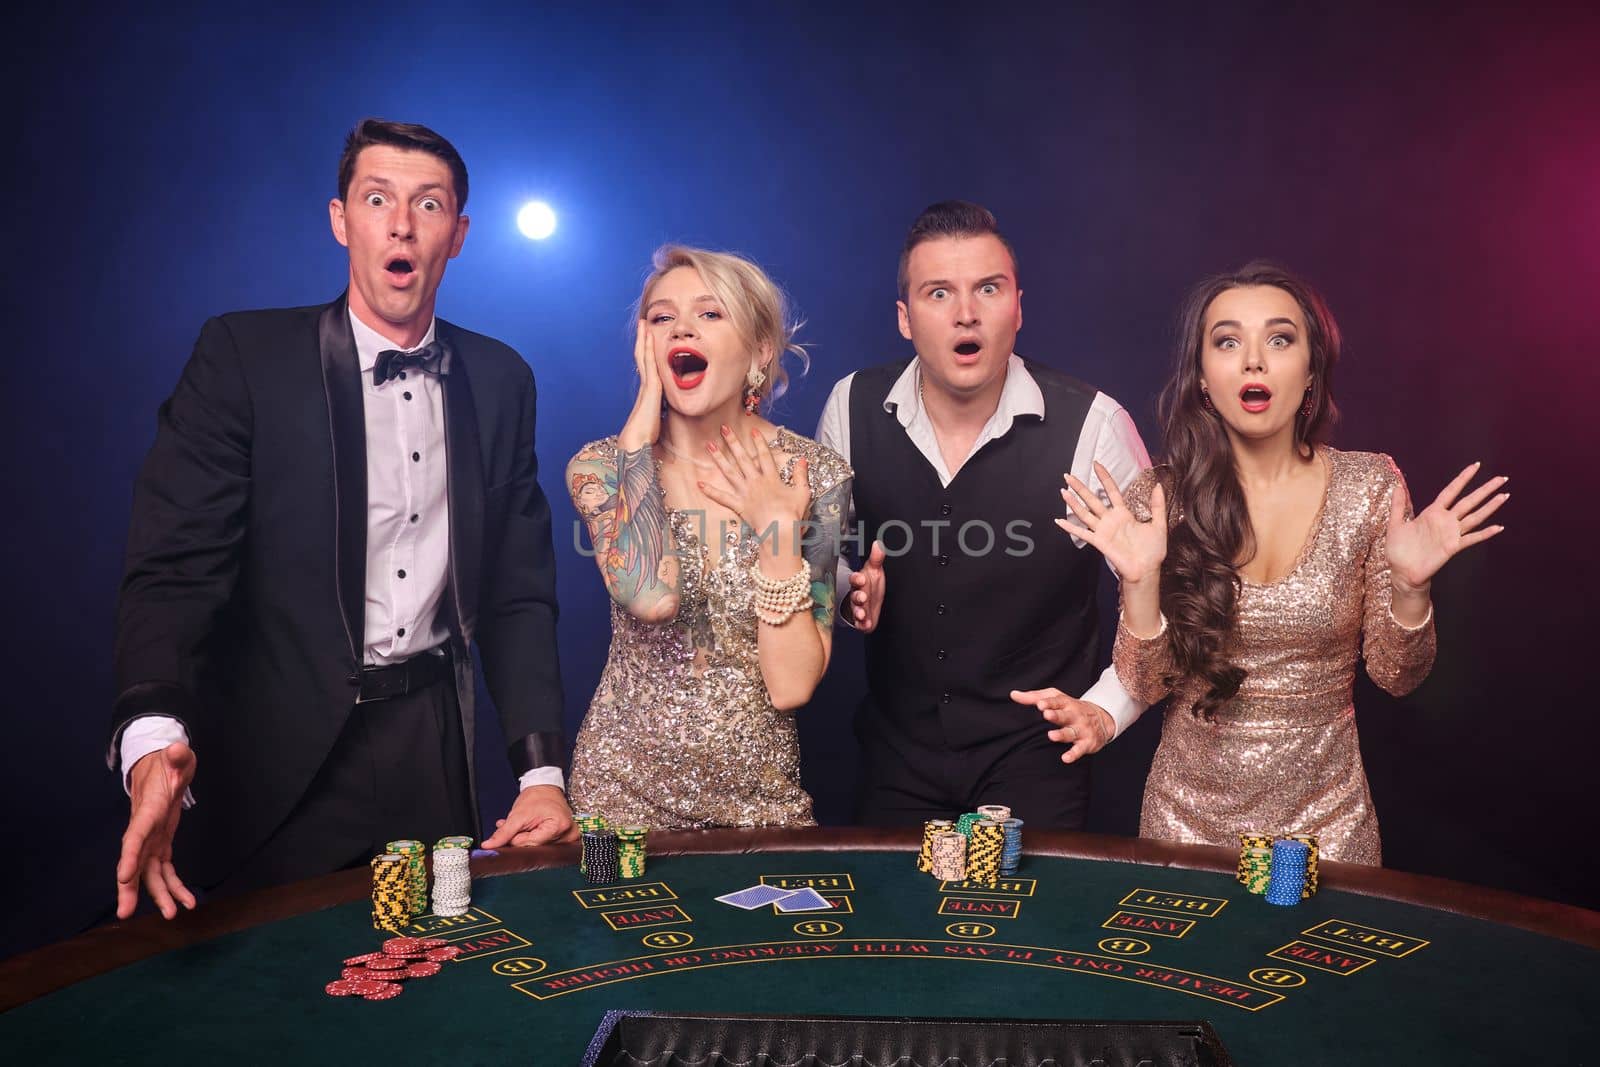 Group of a stylish rich friends are playing poker at casino. Youth are making bets waiting for a big win. They are standing at the table against a red and blue backlights on black background. Risky gambling entertainment.